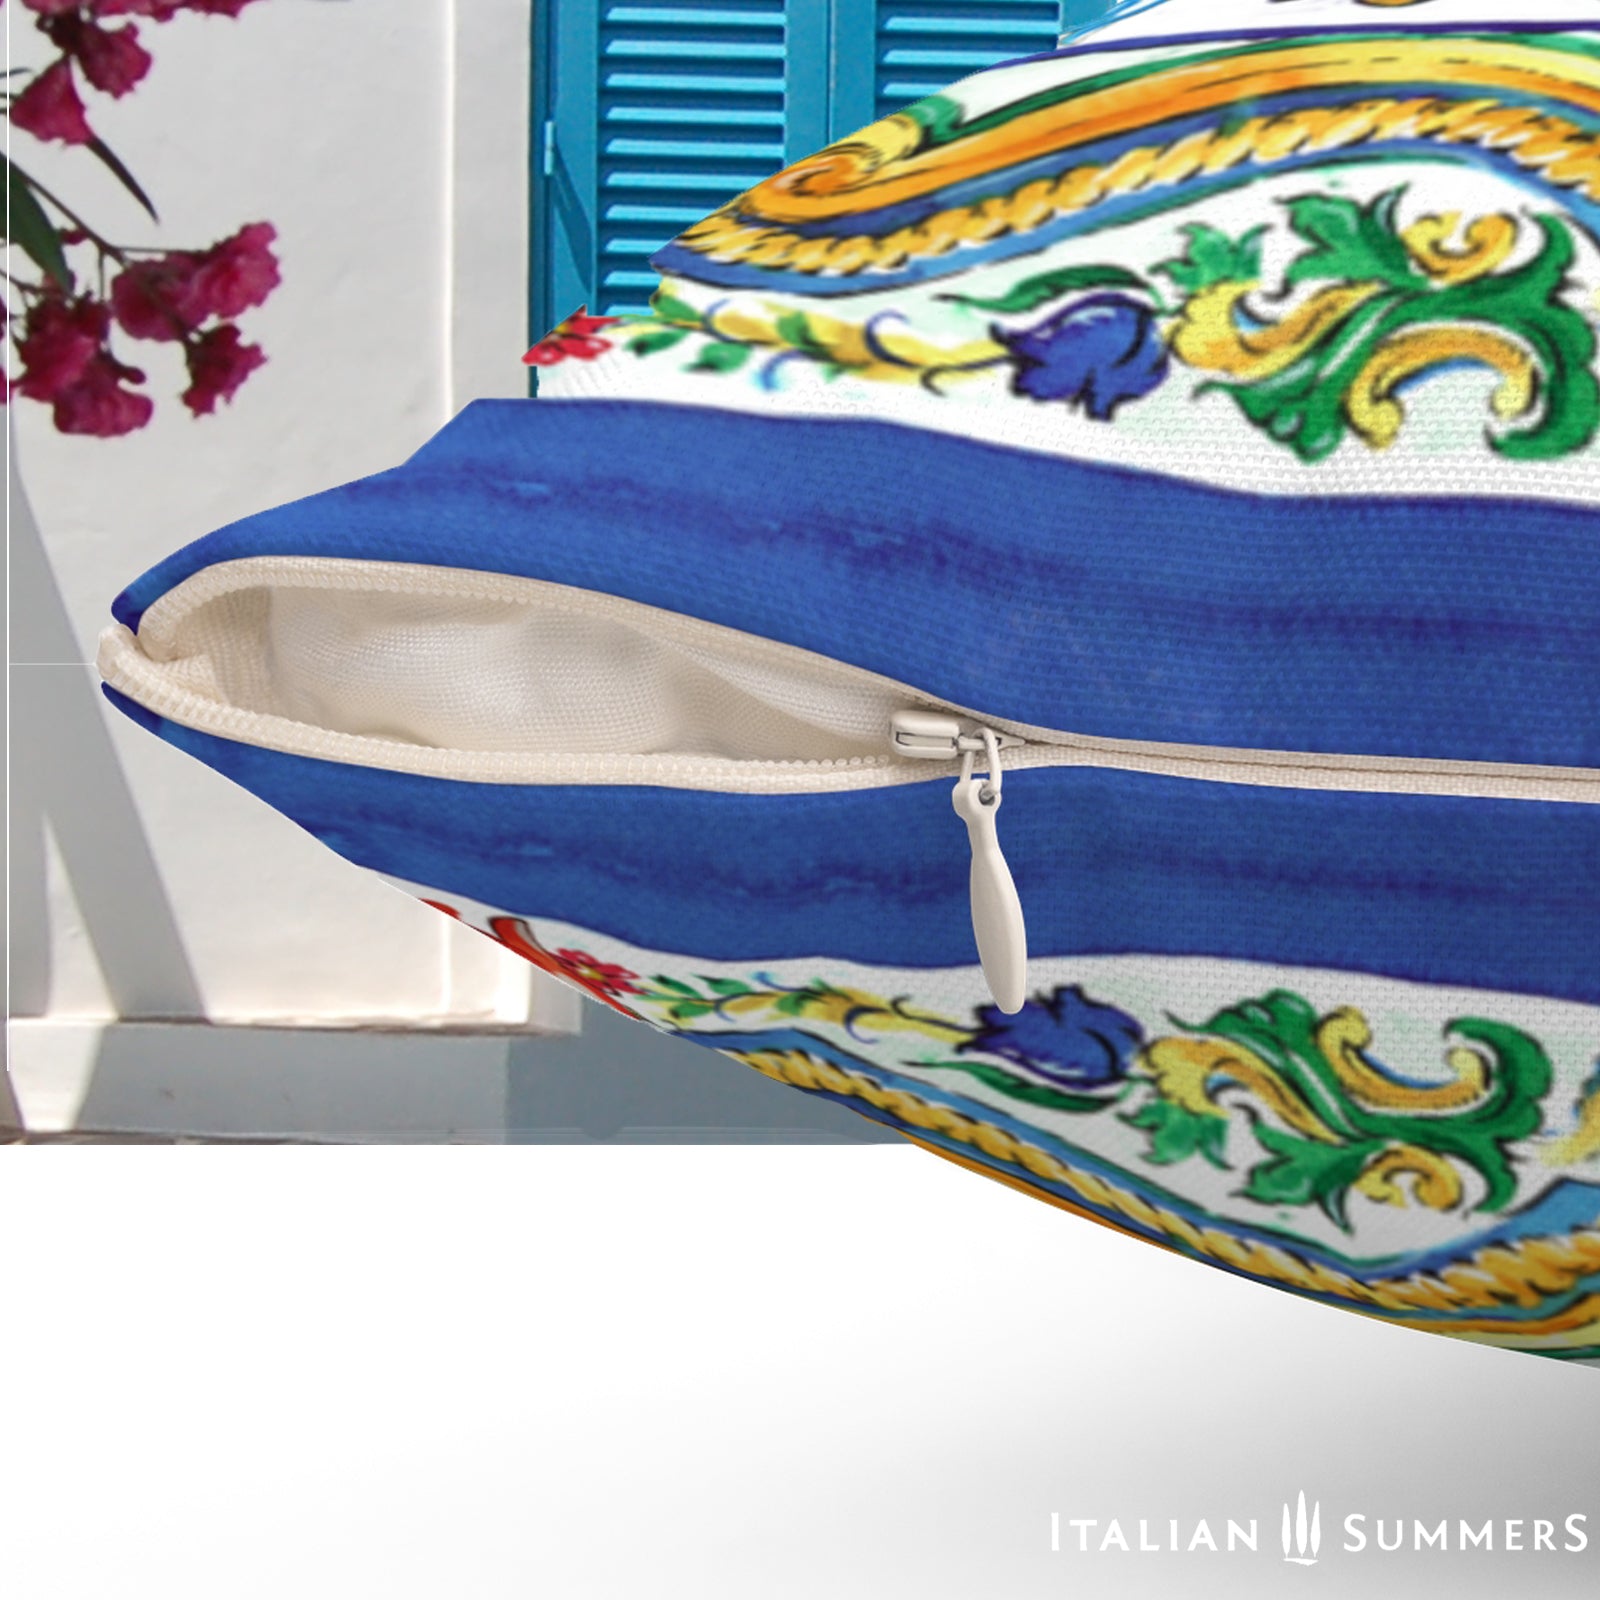 Italy inspired pillow cover with a print of a big Italian Sicilian maiolica tile and flowers. Main colors red, blue yellow and white. On the rim there is a blue trim. Very happy and lively Sicilian print. Made by Italian Summers